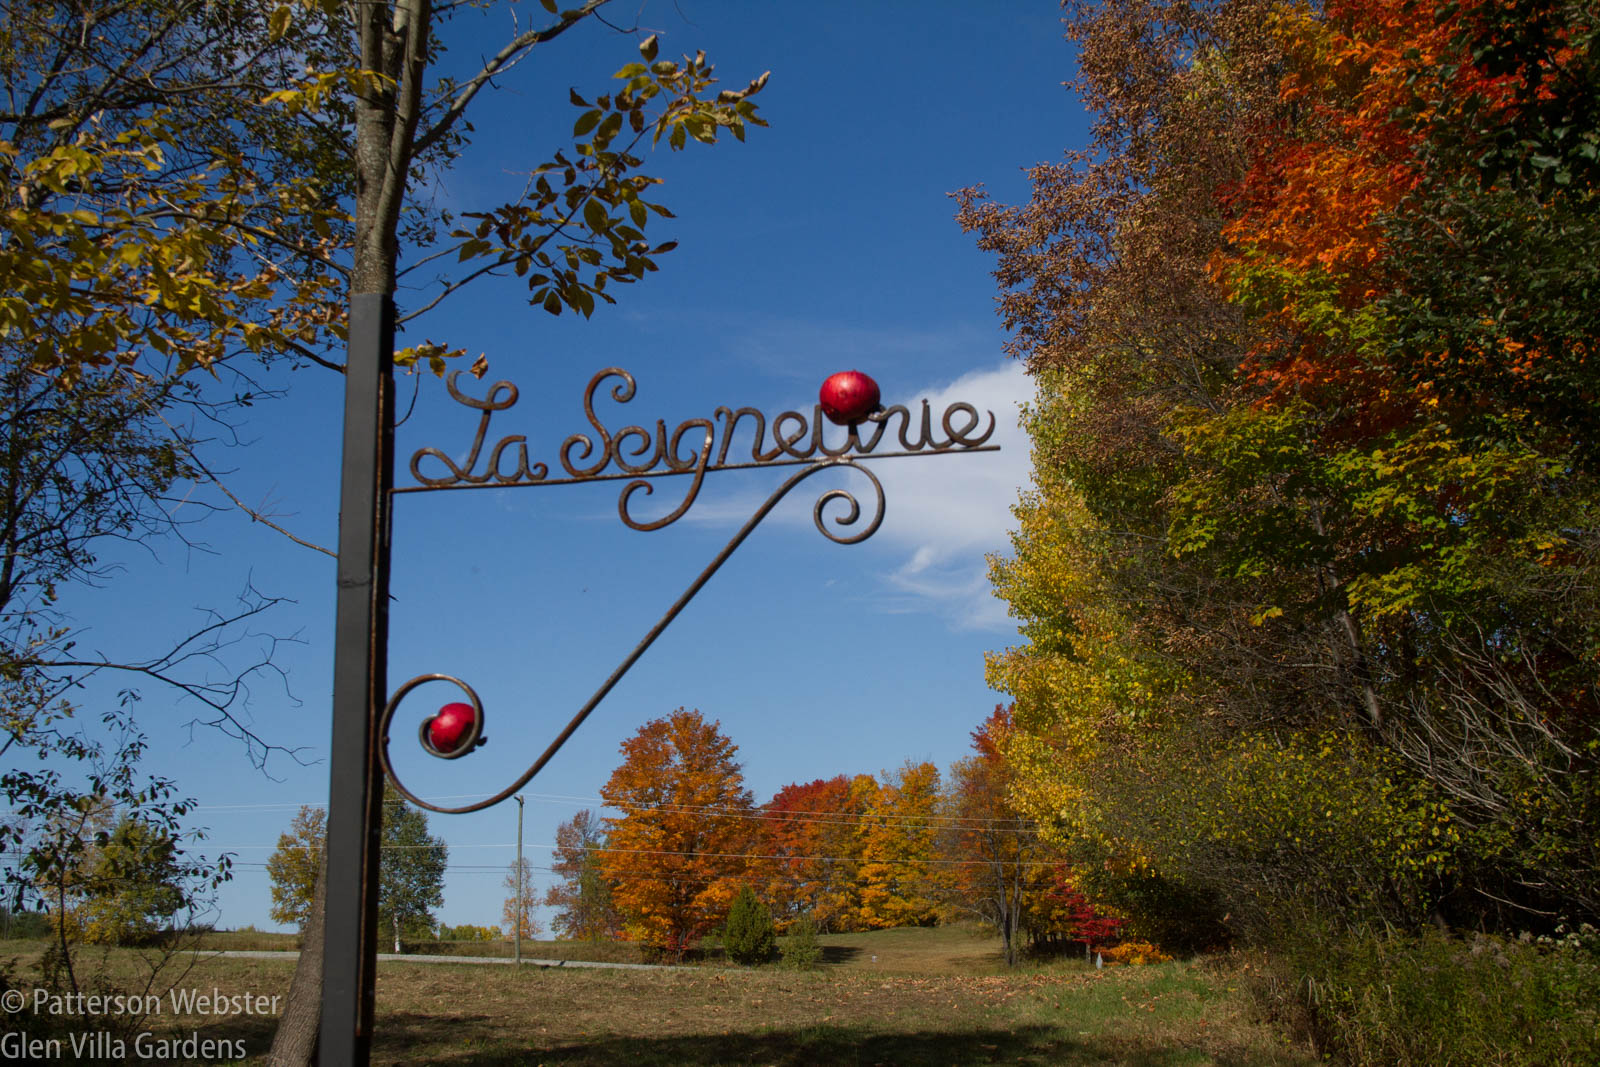 Who put the apples on the Seigneurie sign? Thank you, whoever it was!